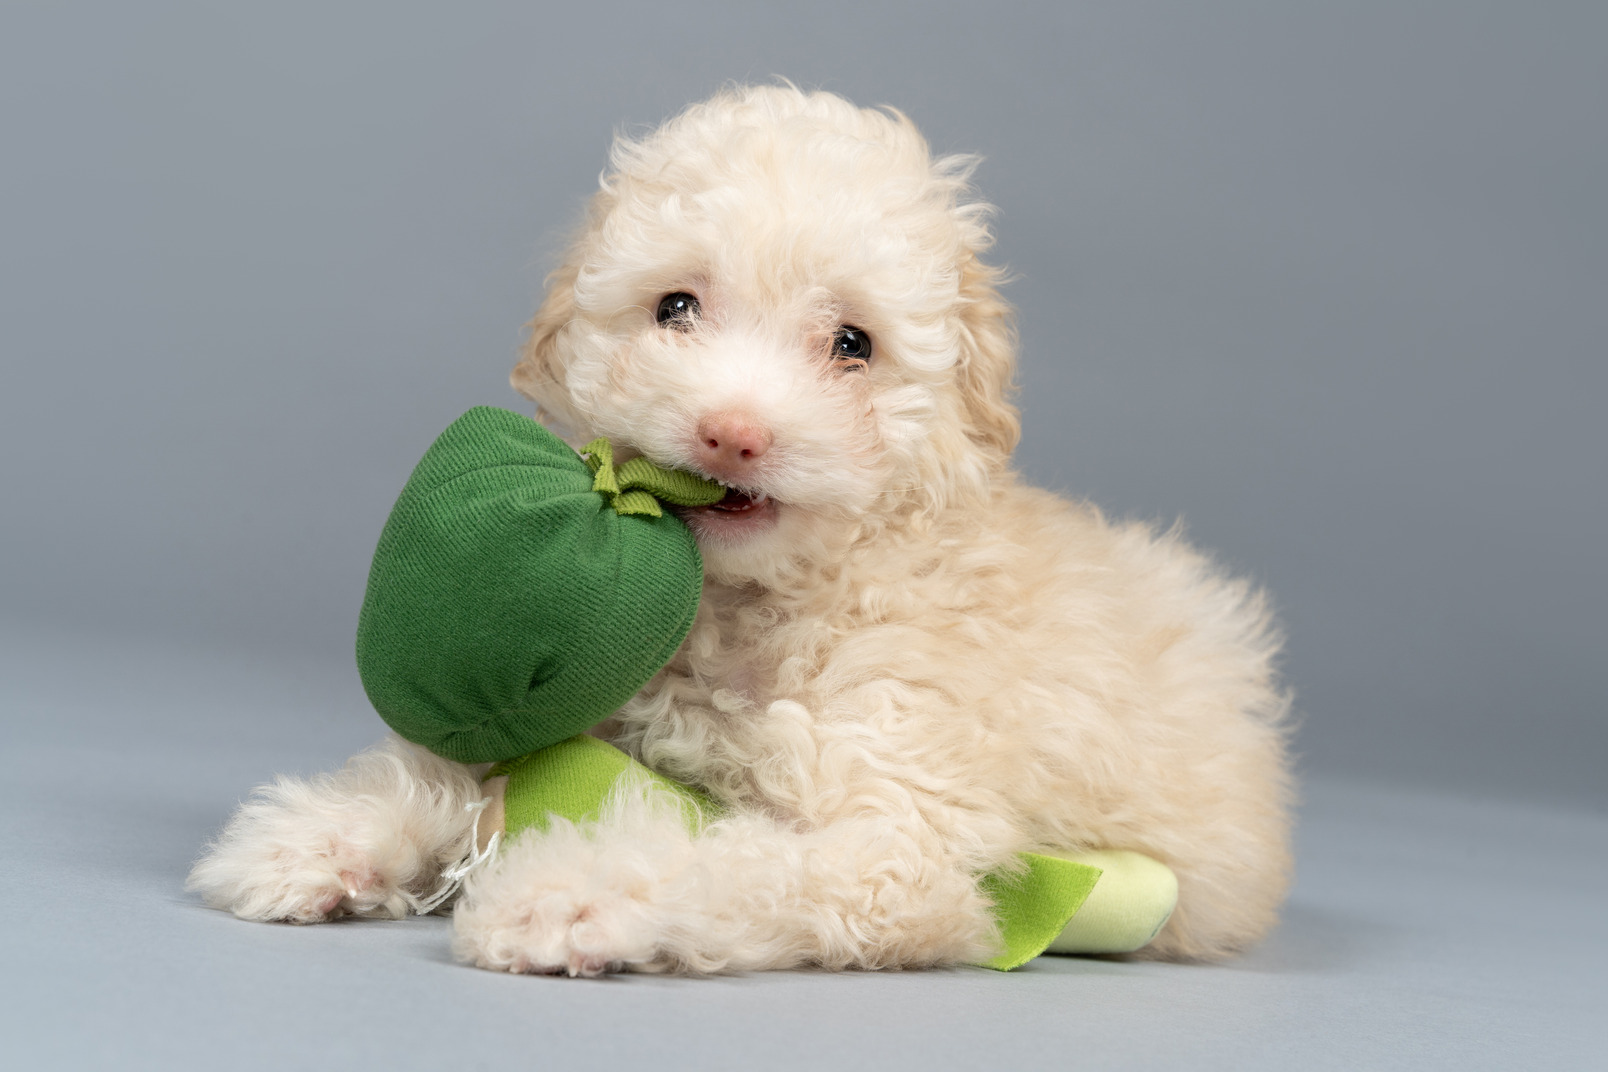 Cute white poodle holding a toy in his mouth